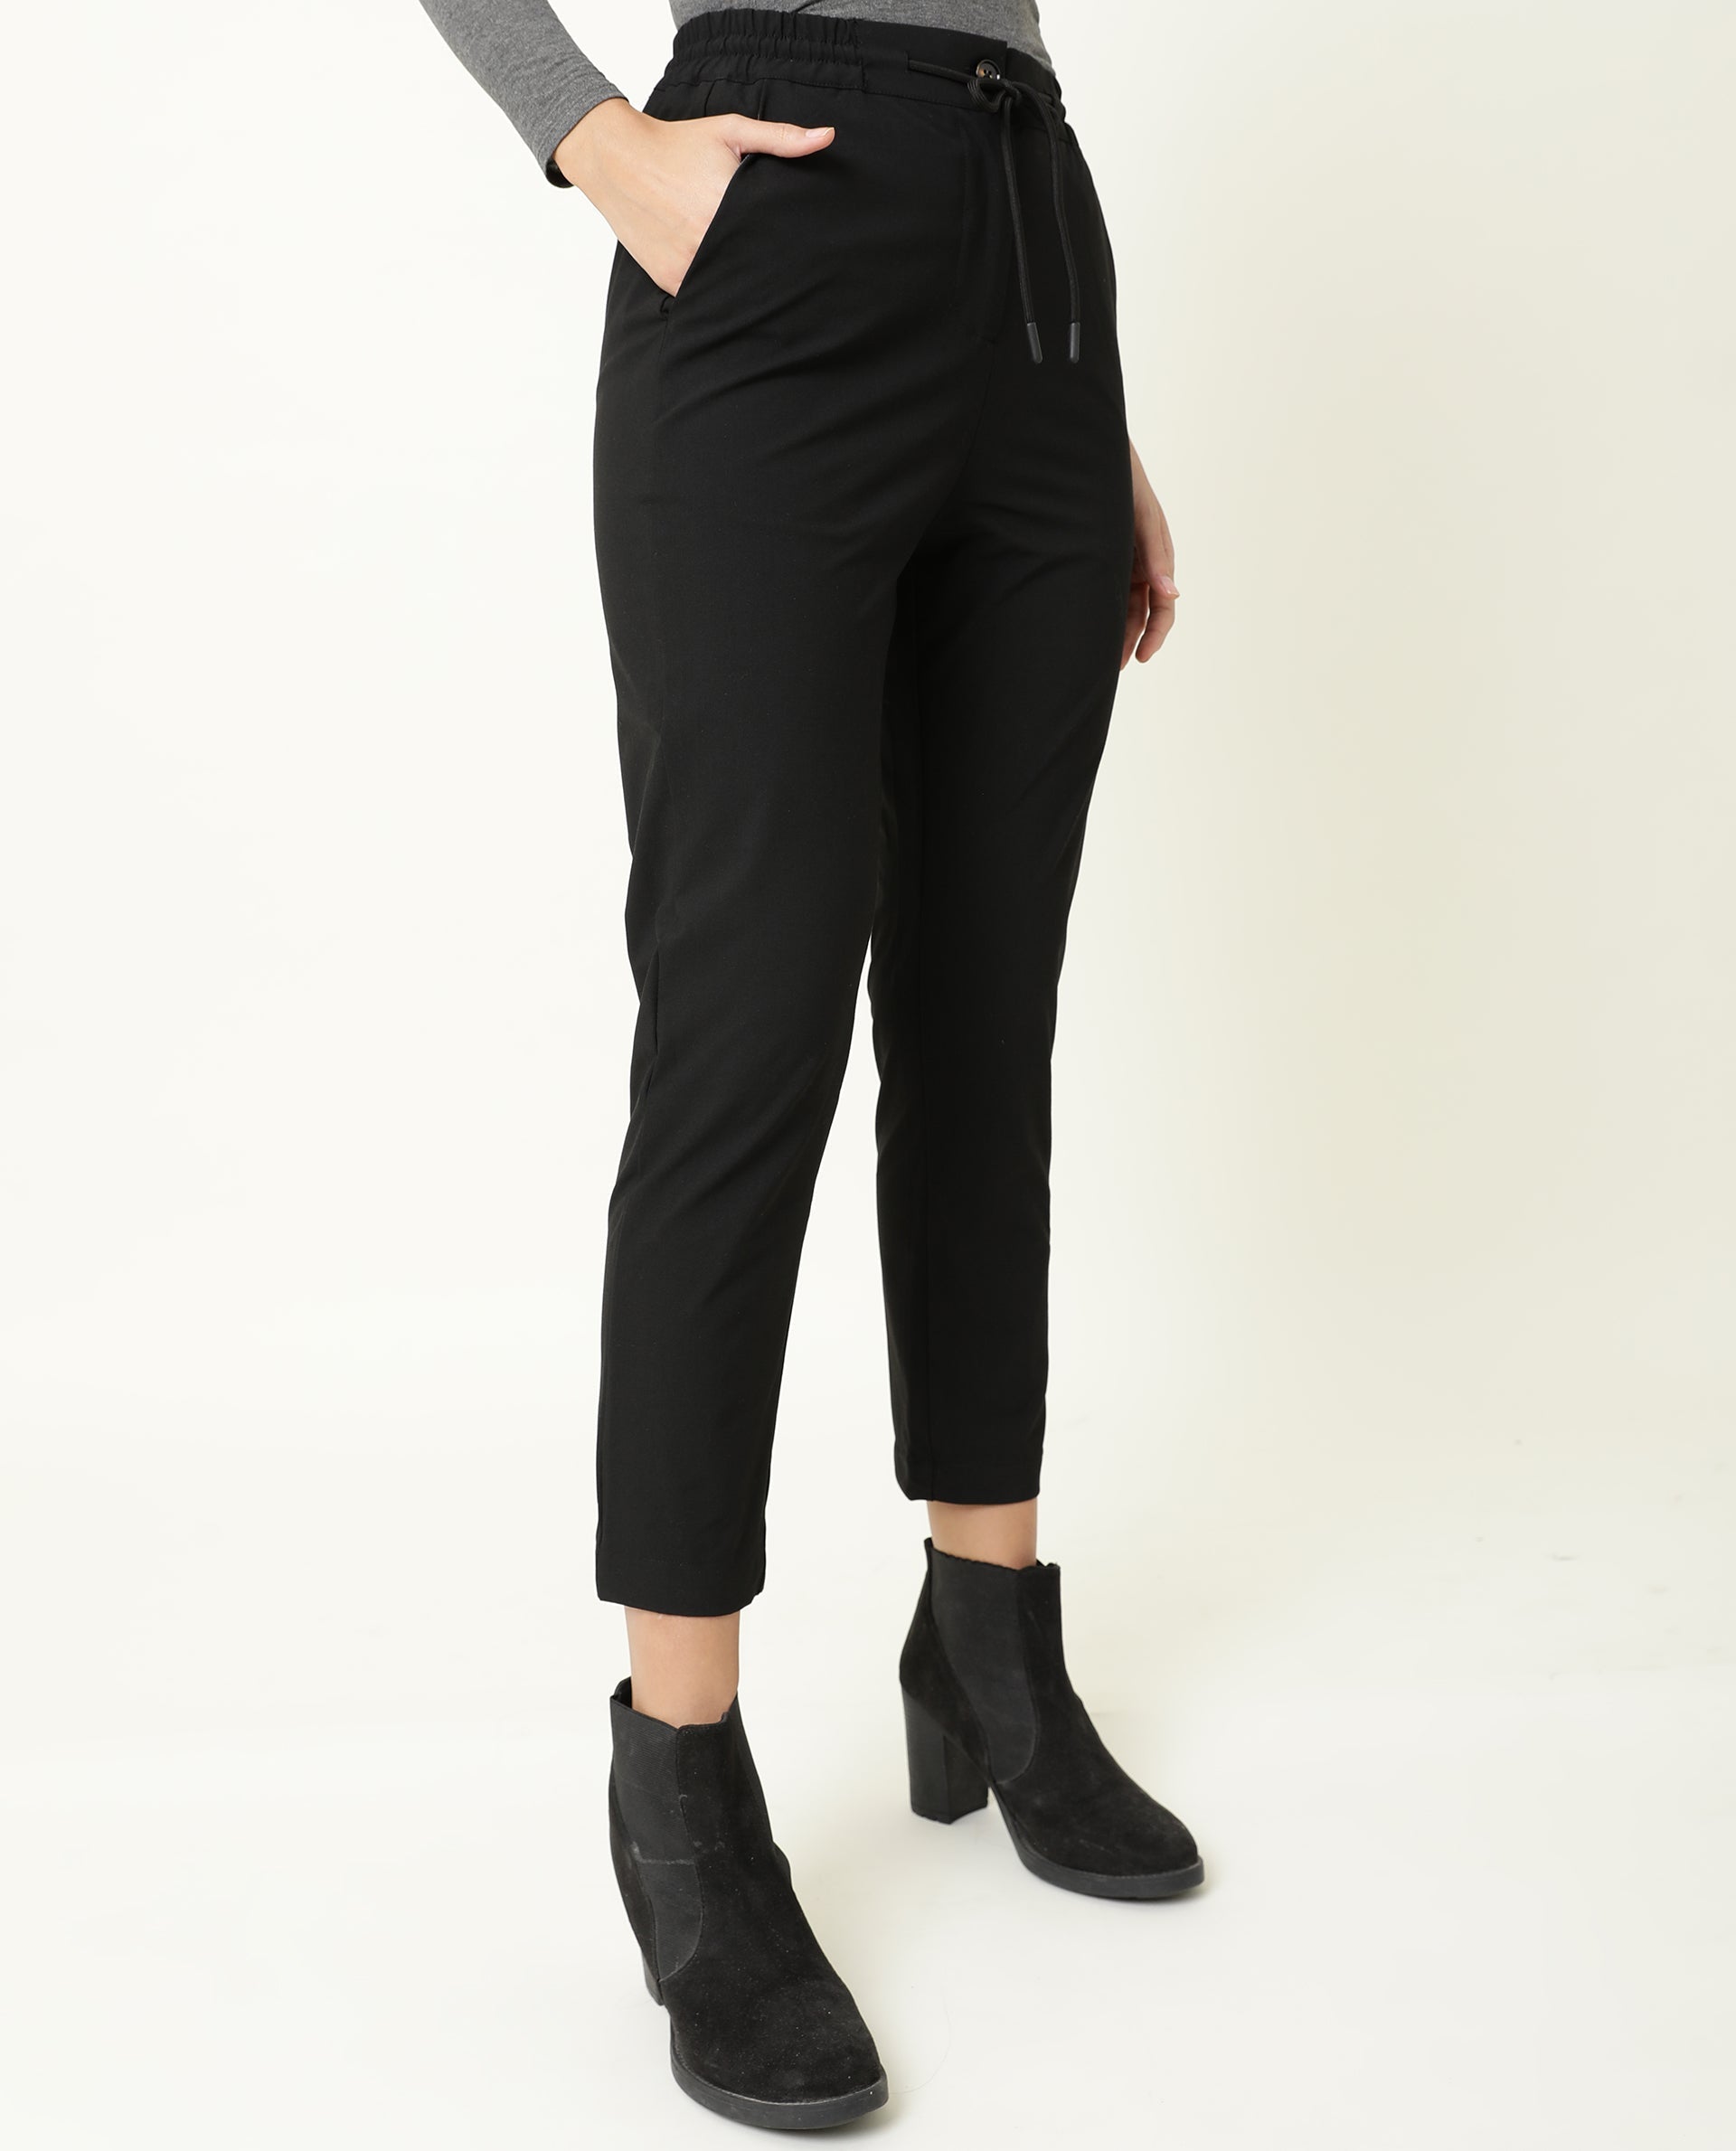 WOMENS LOCOMOTE BLACK TROUSER POLY VISCOSE STRETCH FABRIC STRAIGHT FIT ELASTICATED WAIST BAND